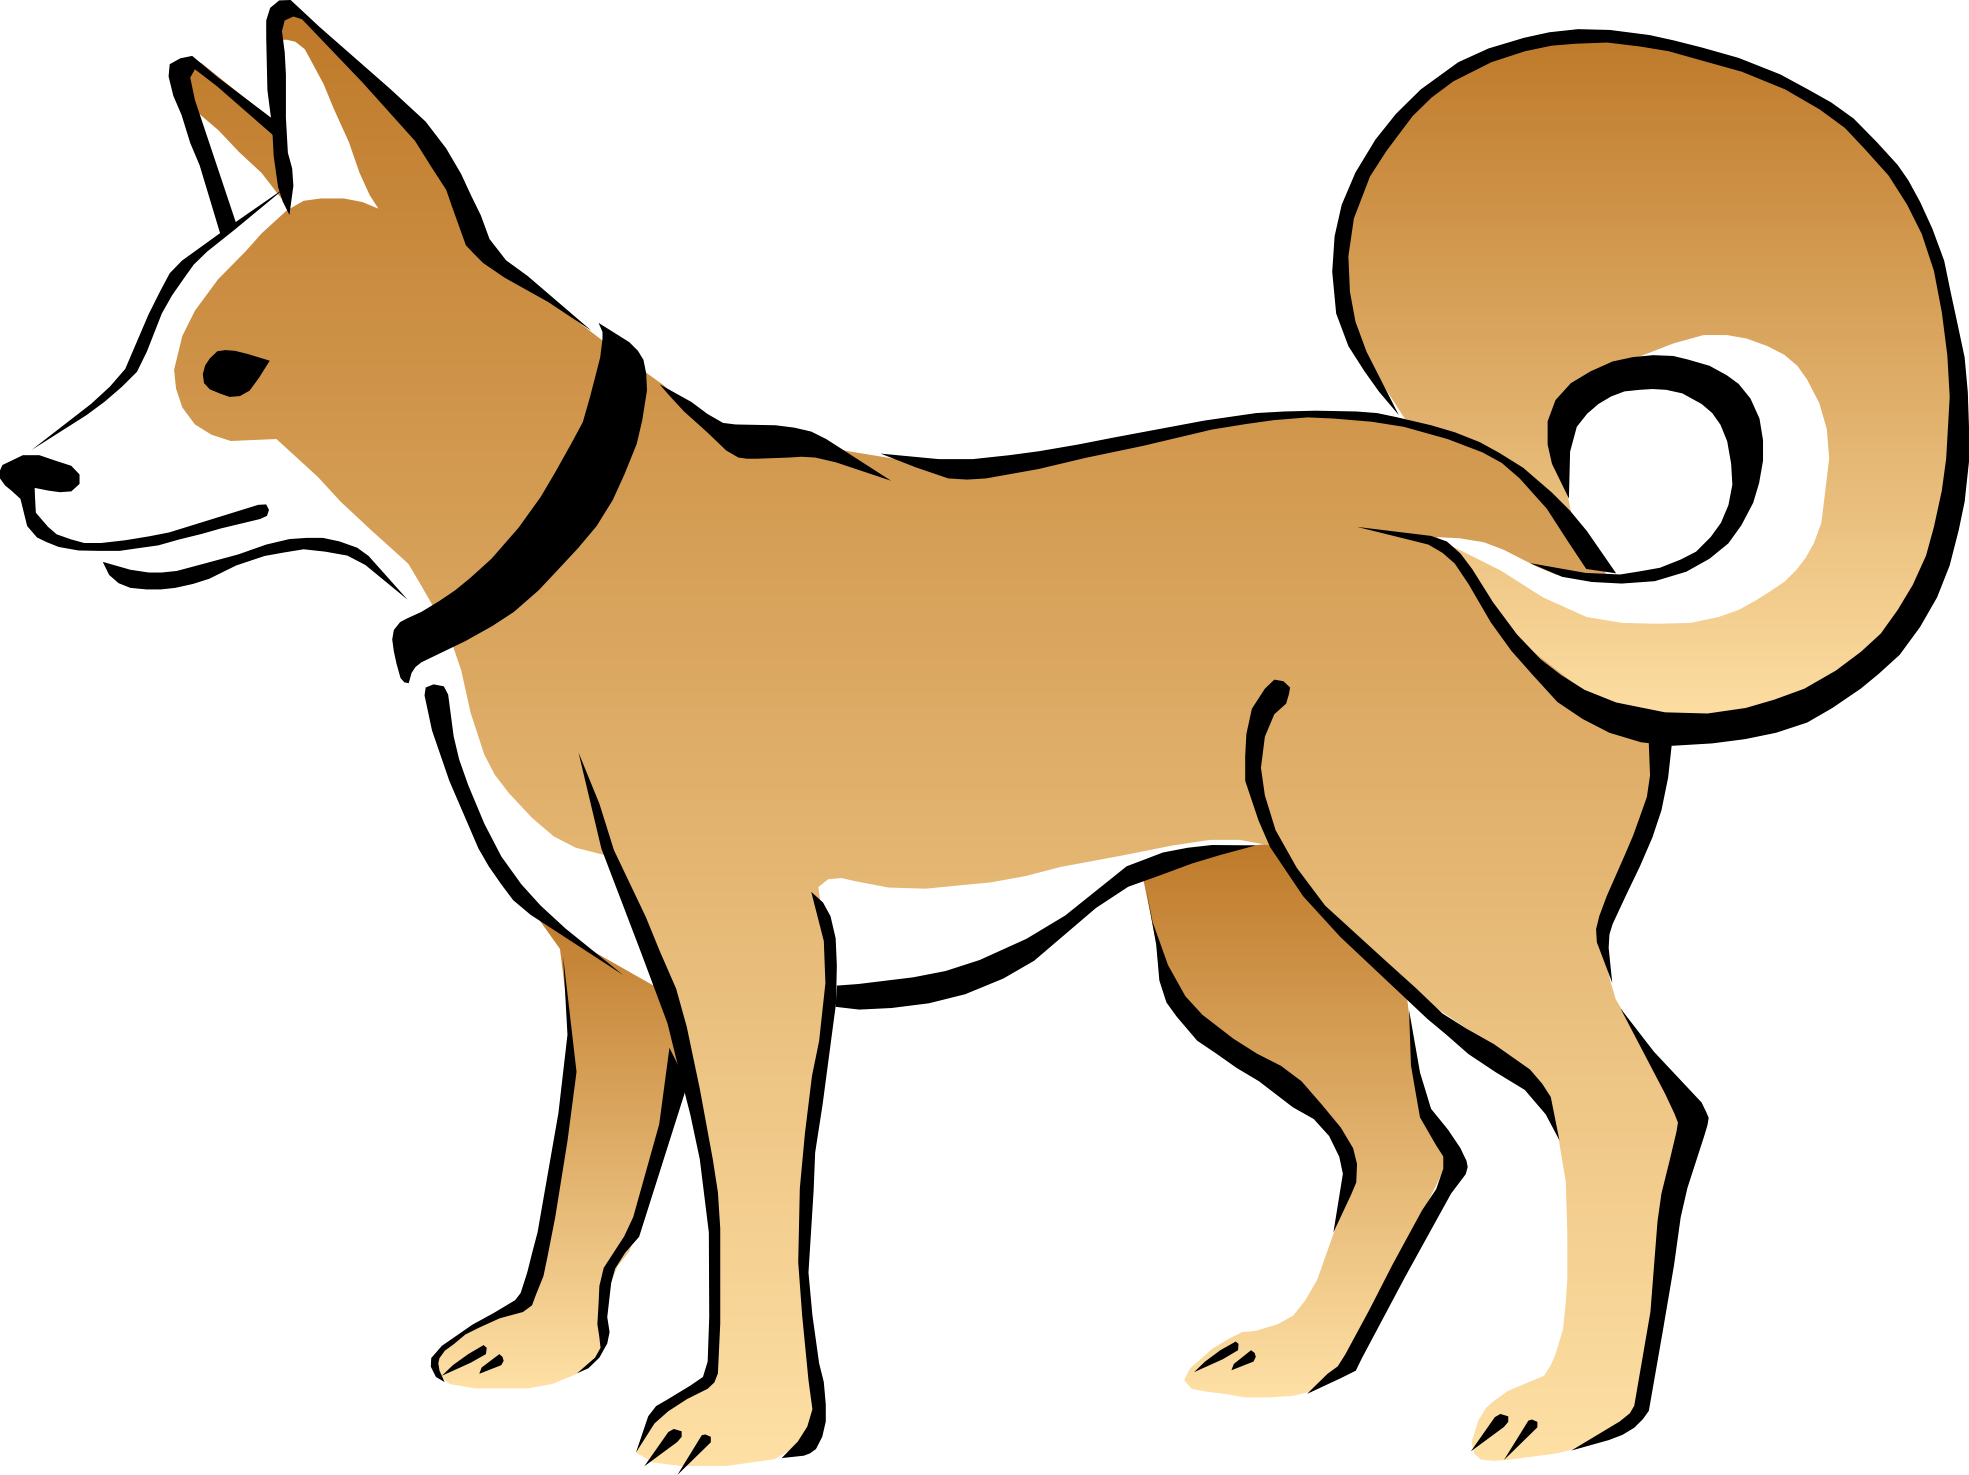 Cat and dog clipart no background - ClipartFox